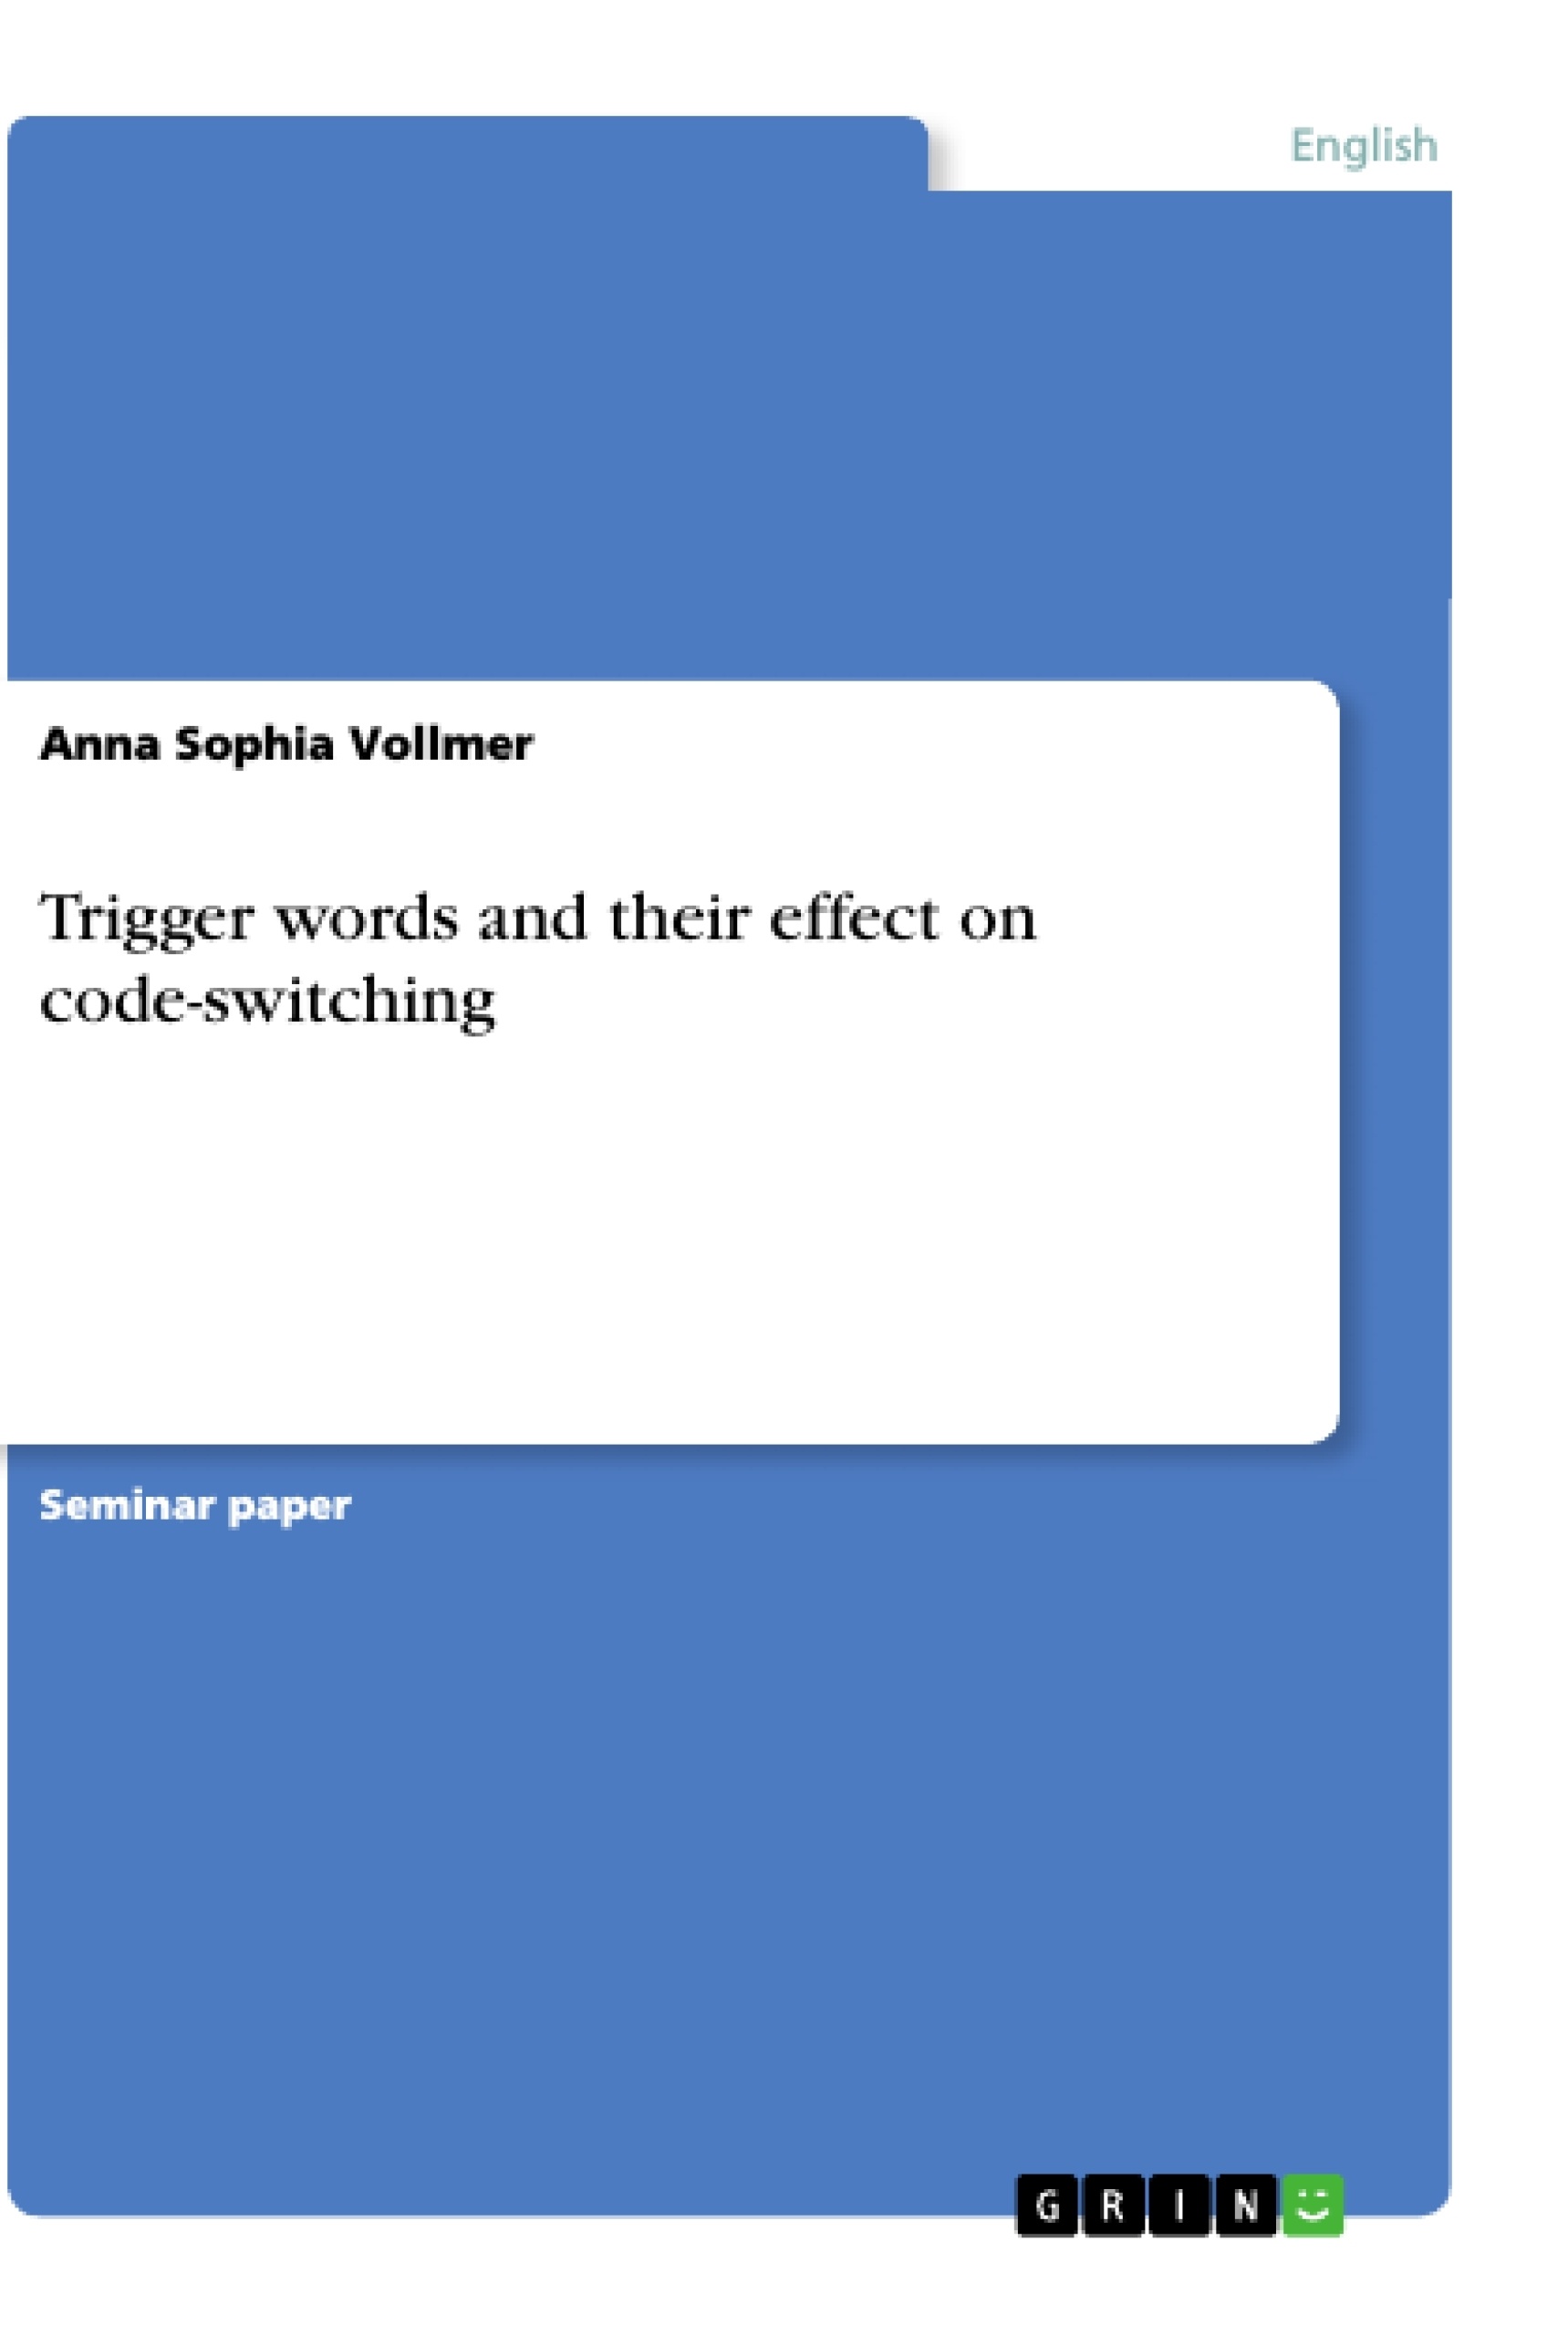 Title: Trigger words and their effect on code-switching